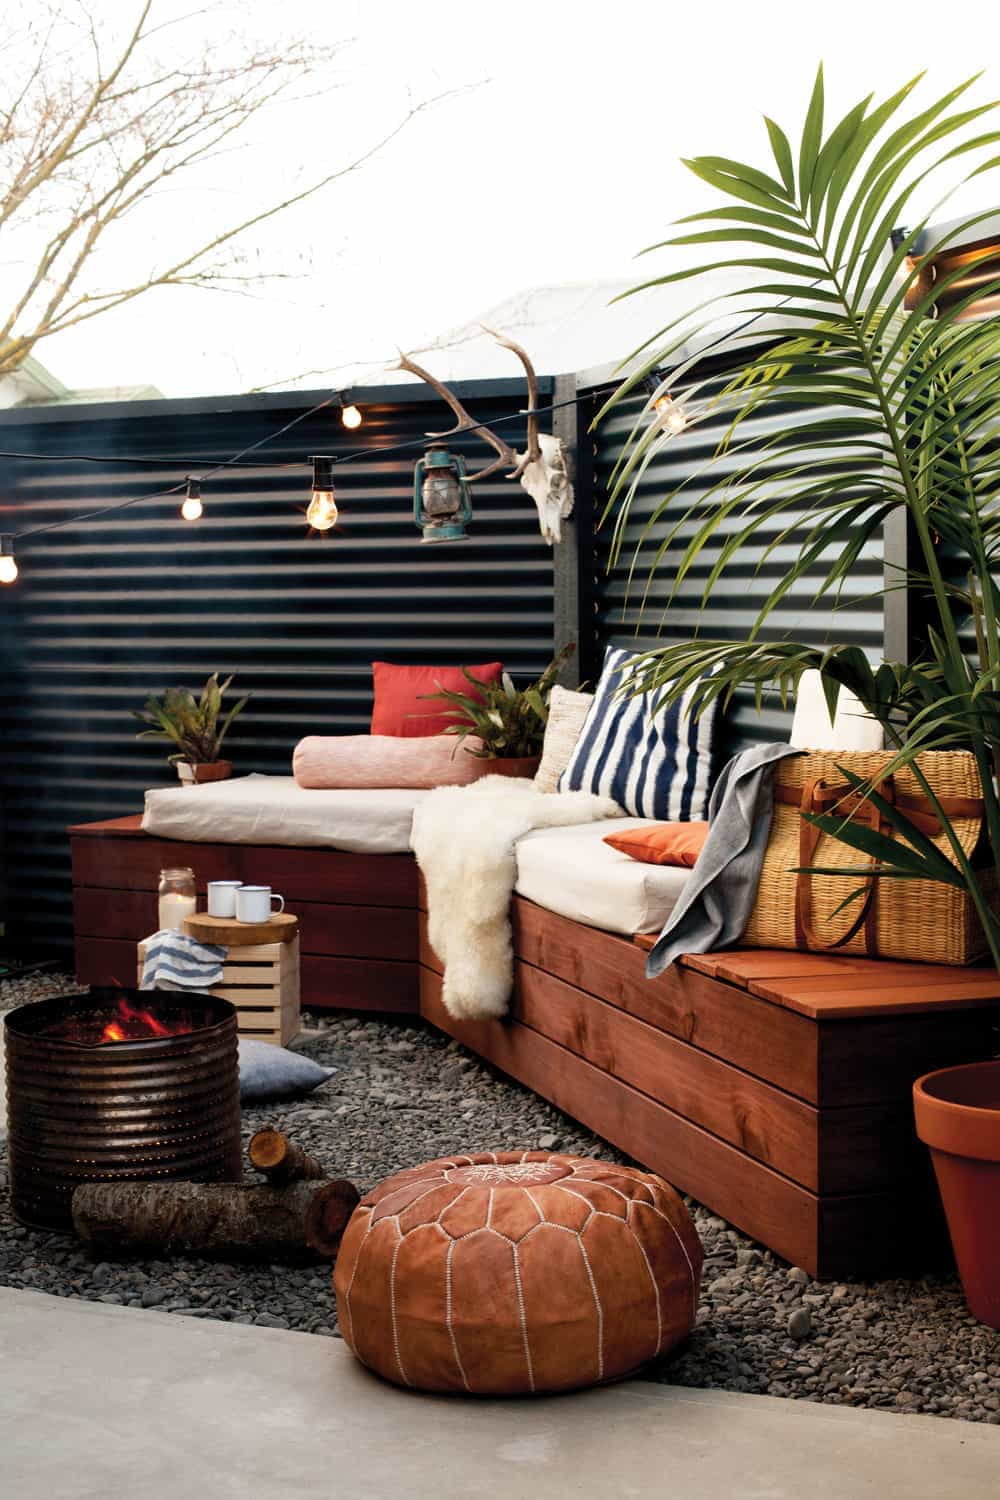 20 ideas for landscaping gardens and backyards with pallets - 145